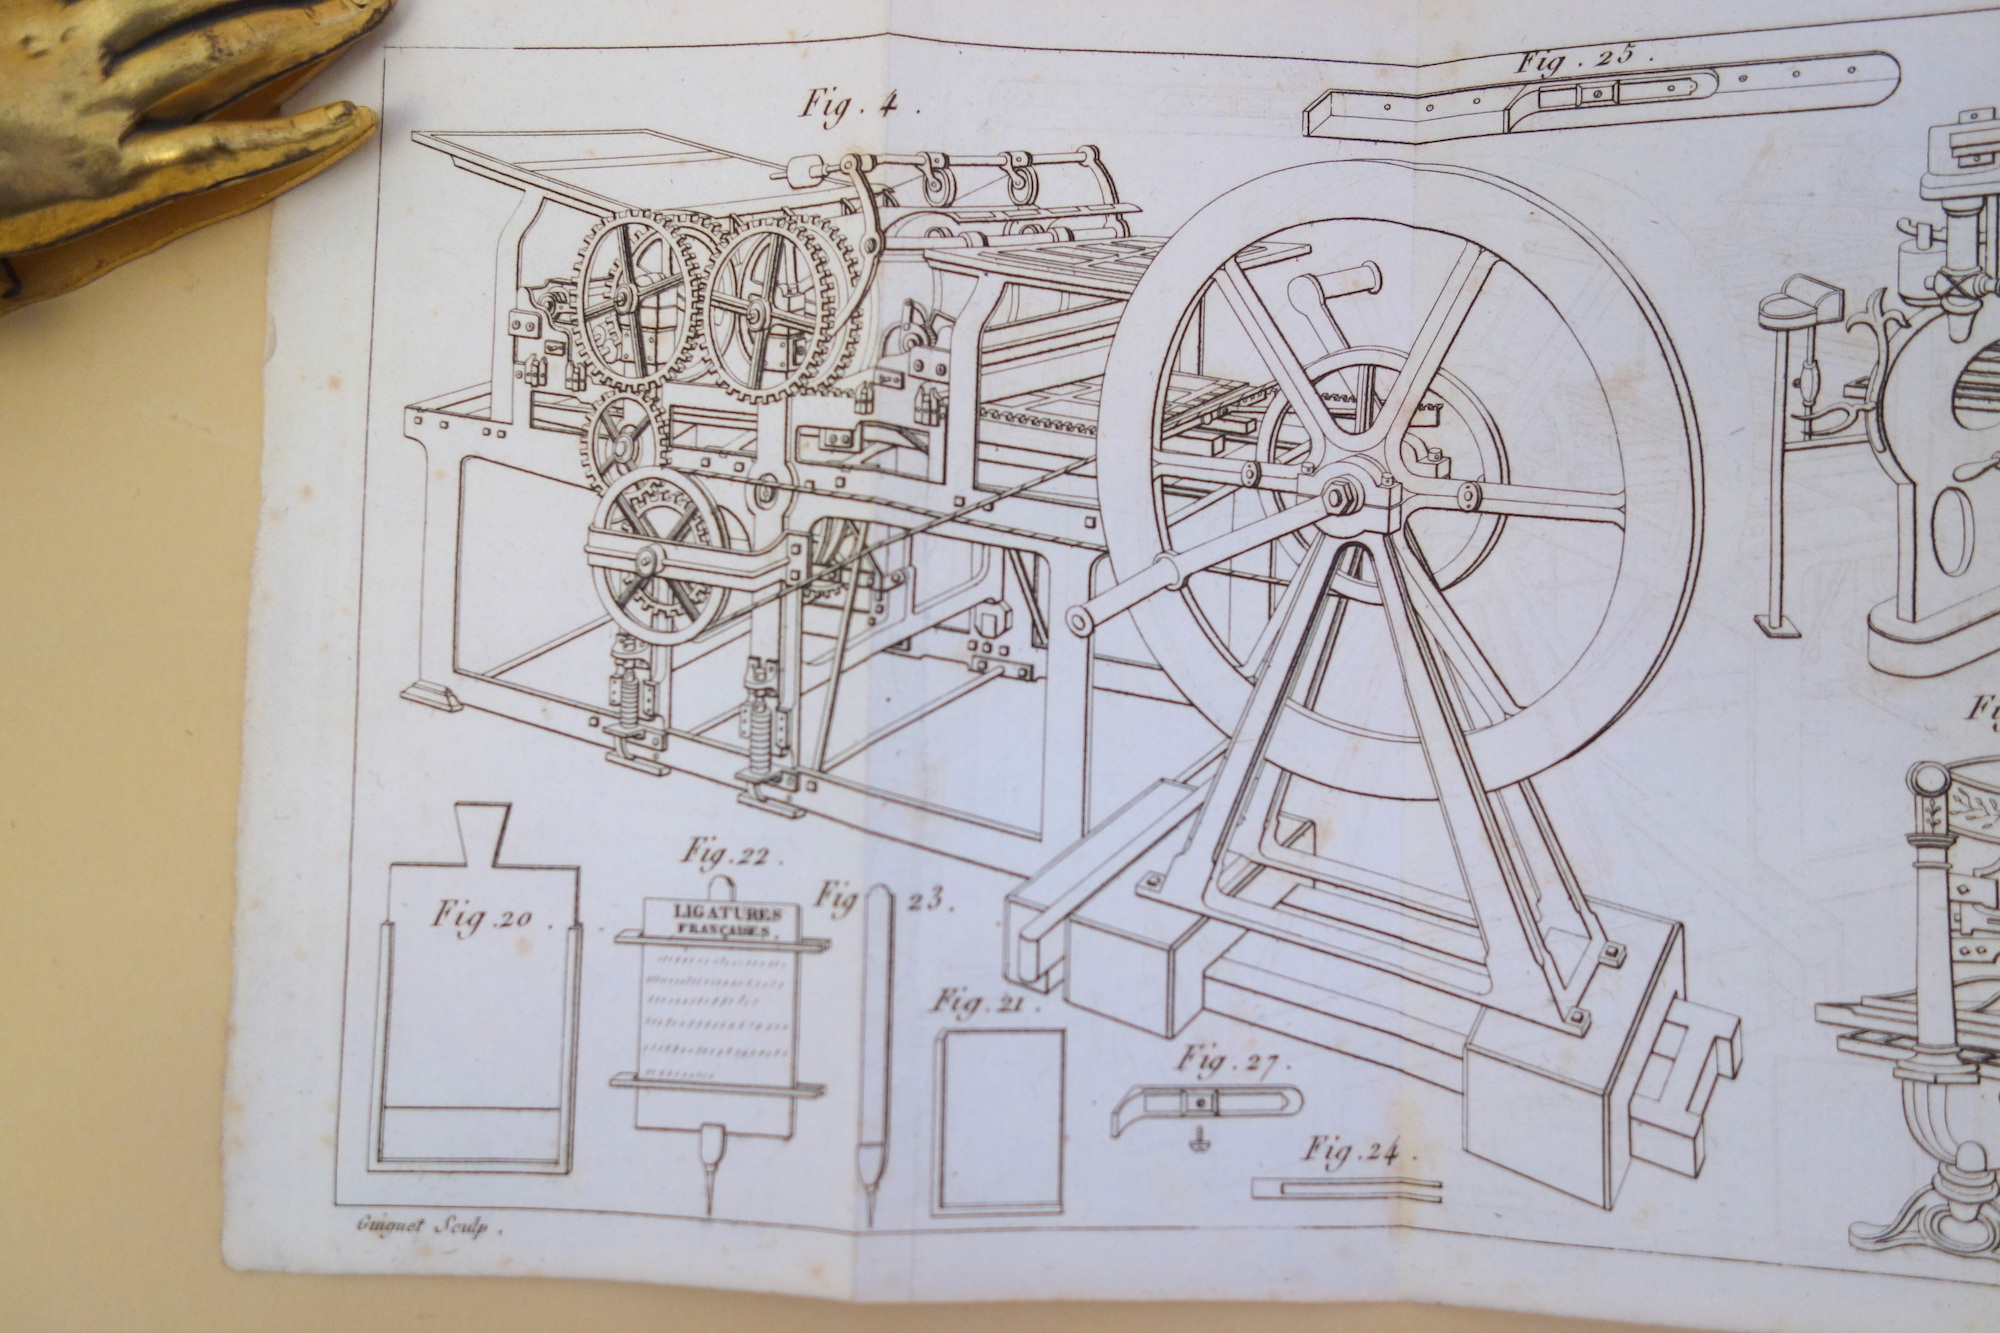 This is the rotary machine that Geronval says was ordered for the printing of the Journal des débats, the most widely read newspaper in France during the Restoration and July Monarchy periods